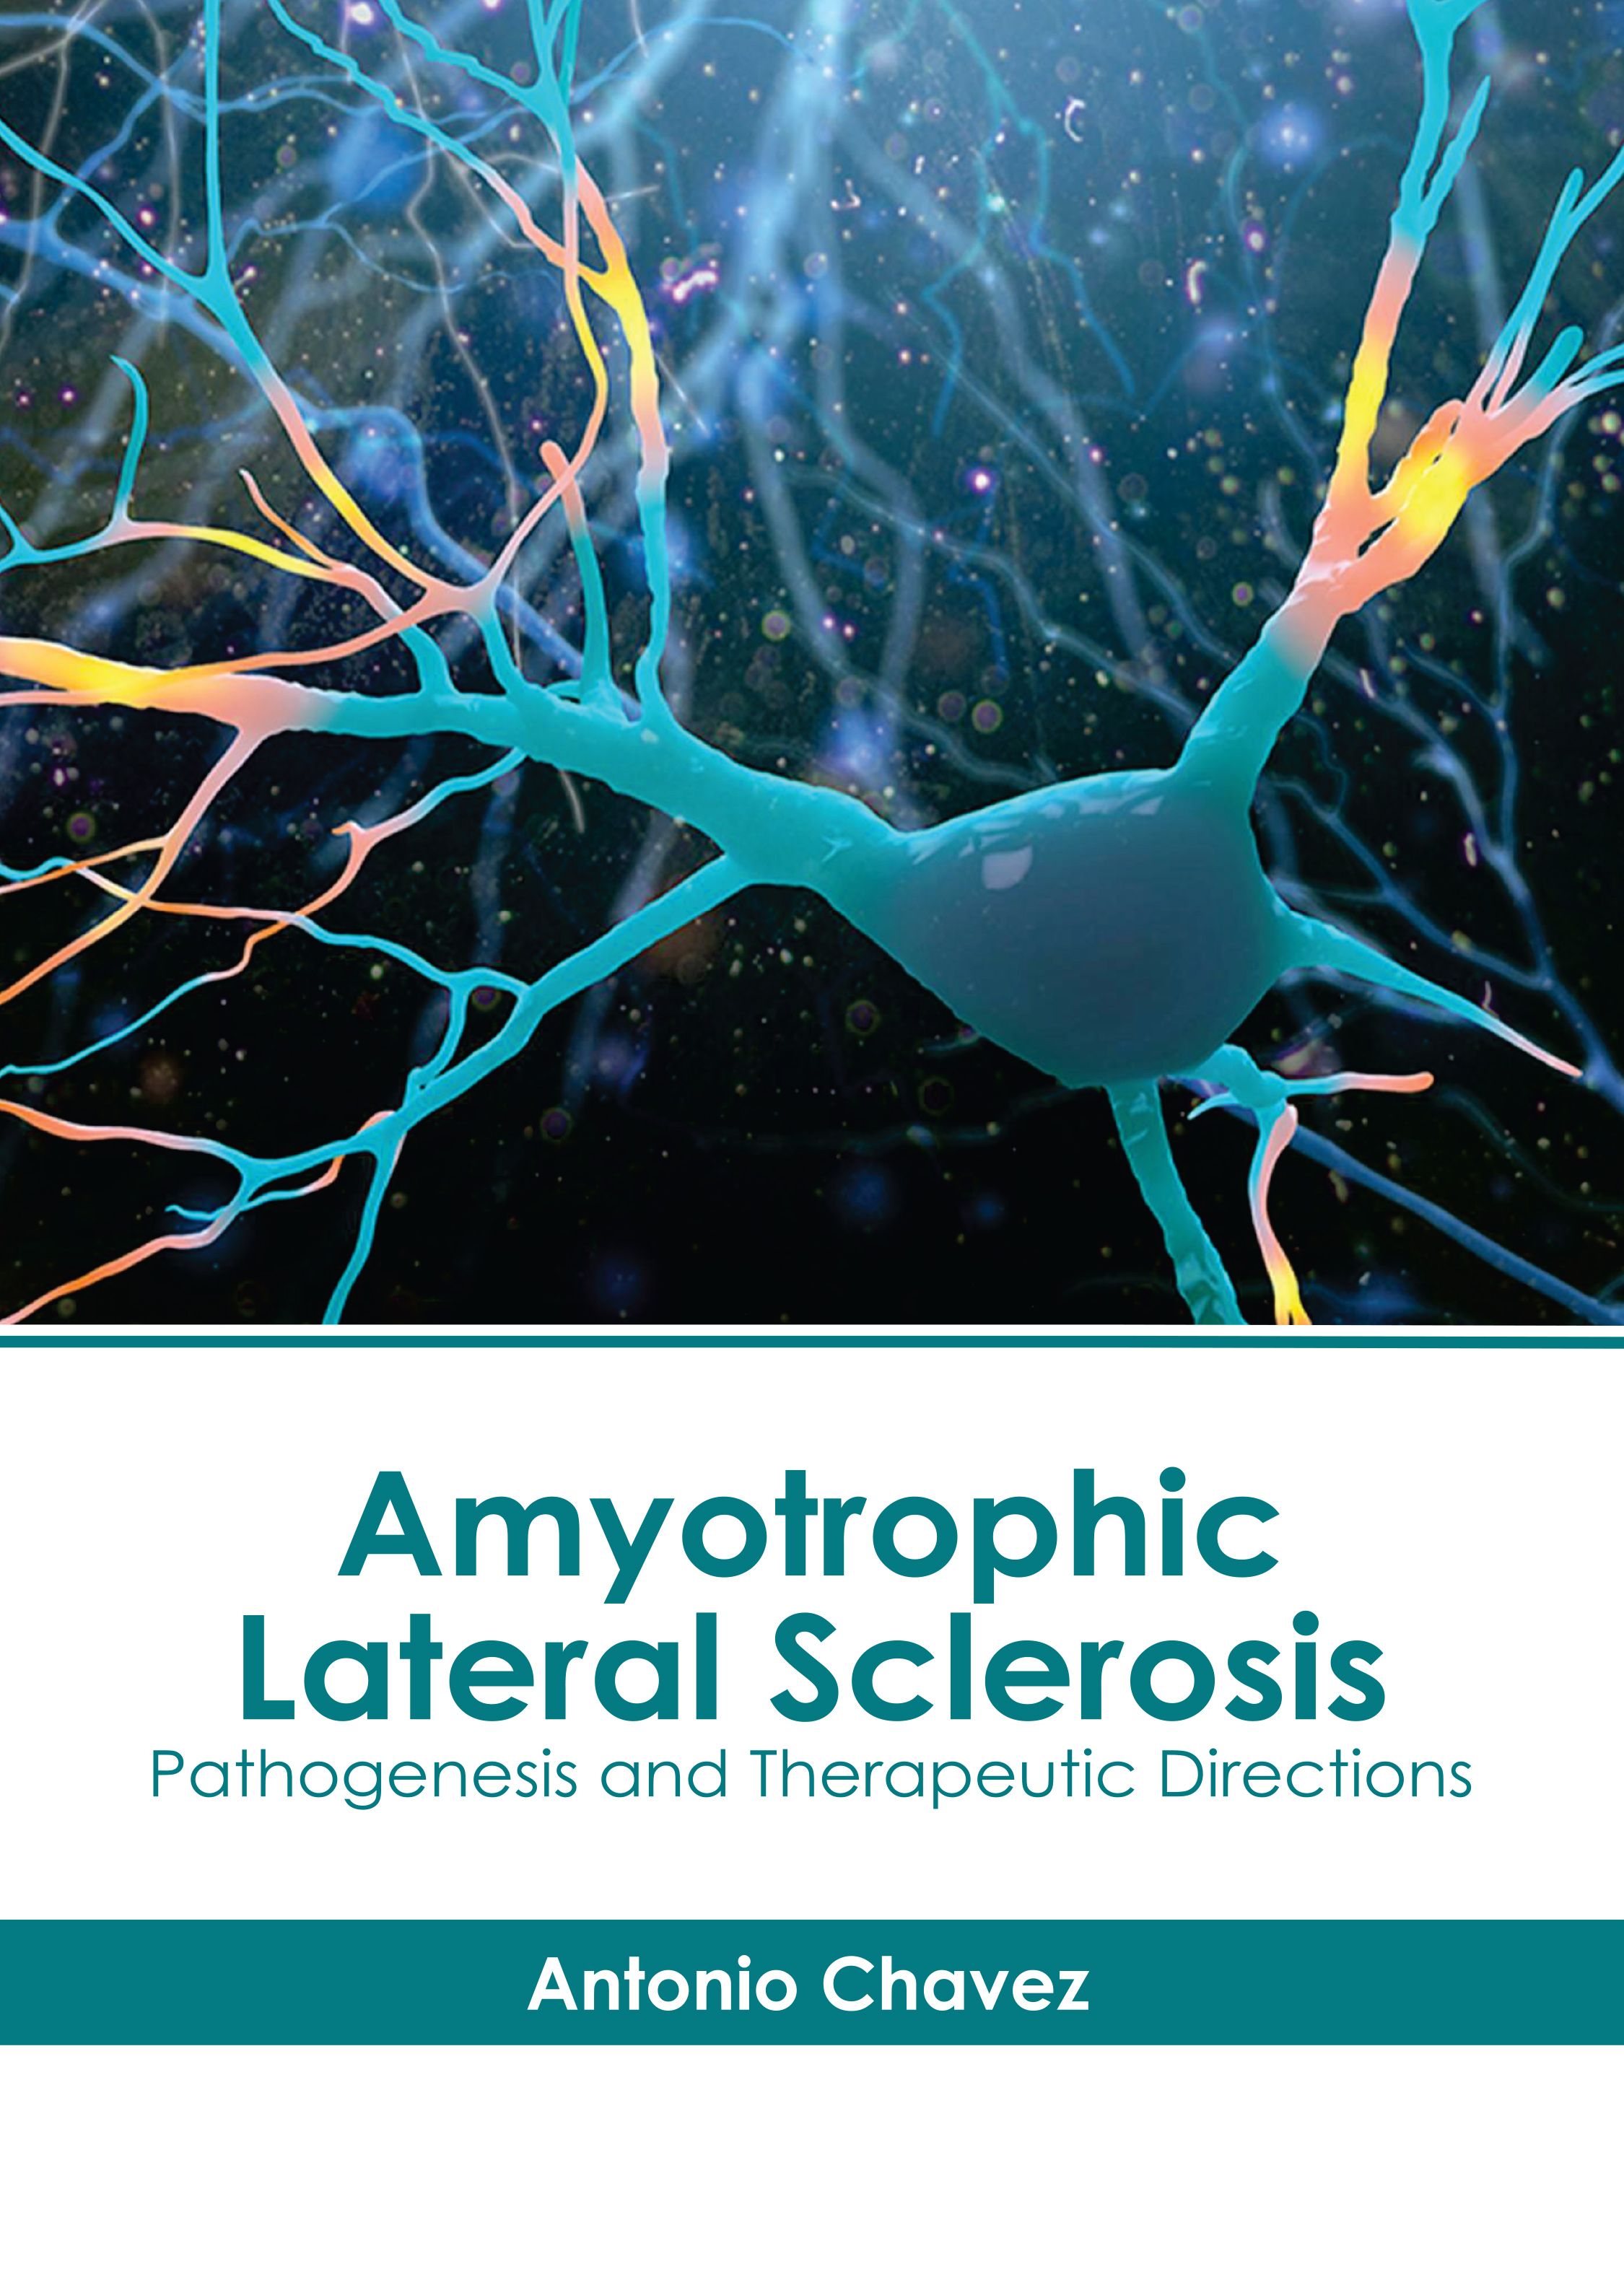 AMYOTROPHIC LATERAL SCLEROSIS: PATHOGENESIS AND THERAPEUTIC DIRECTIONS